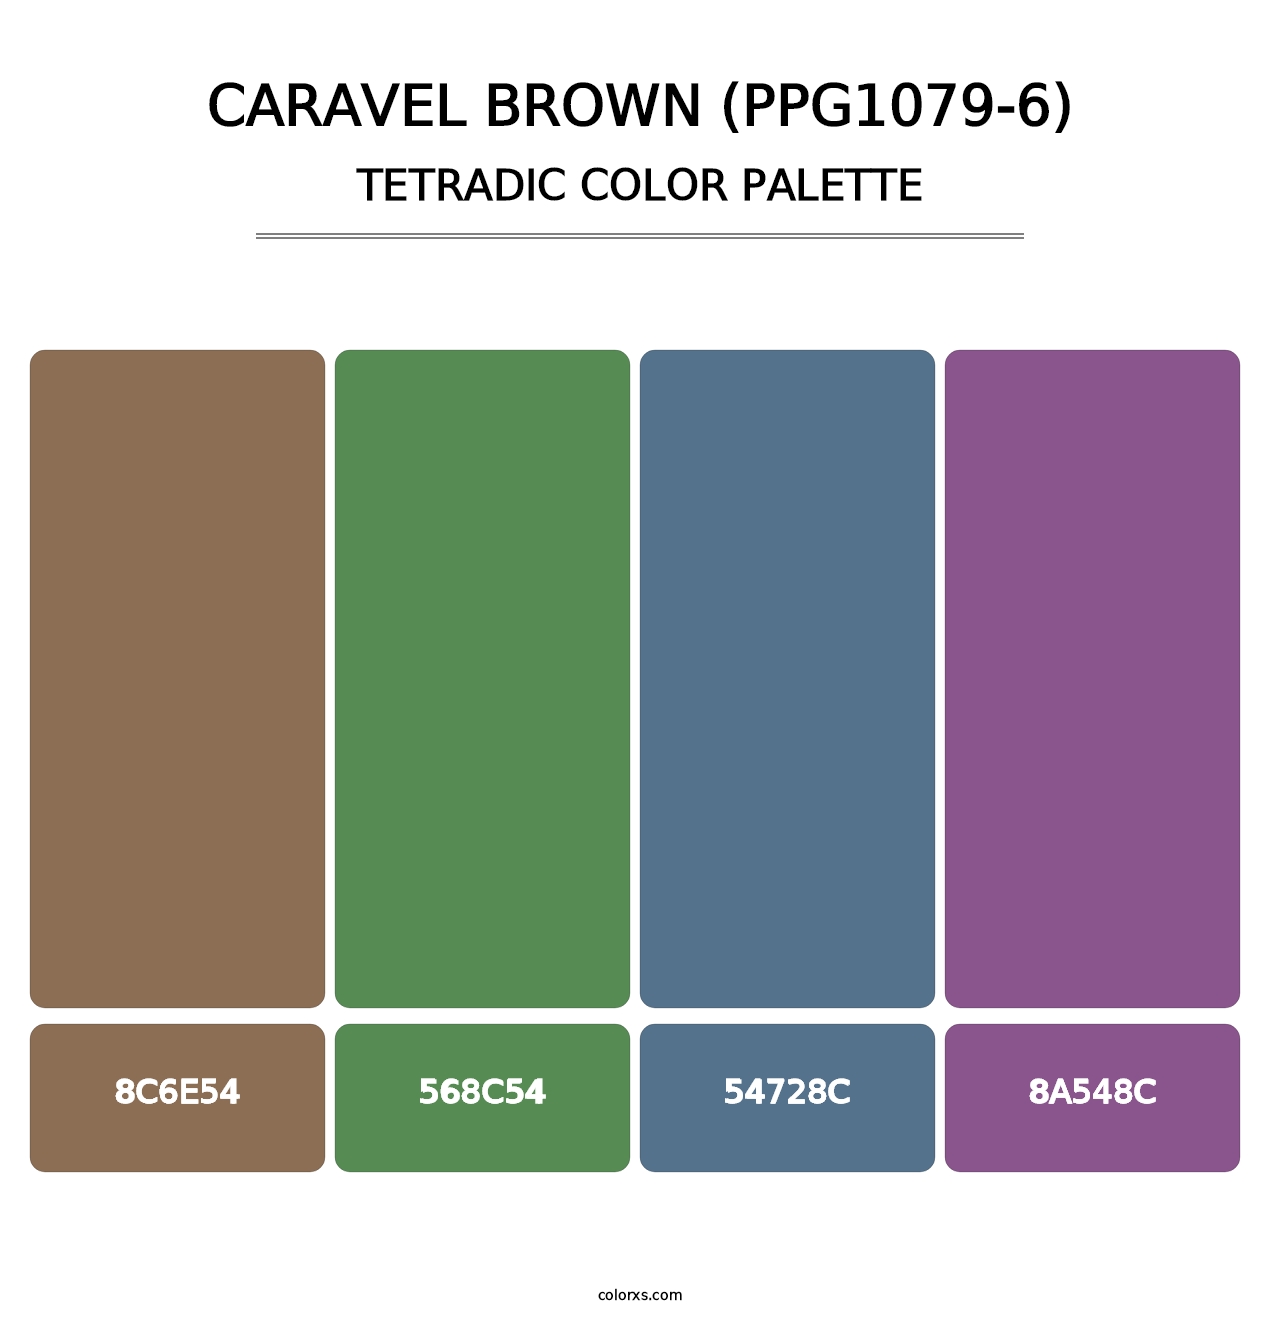 Caravel Brown (PPG1079-6) - Tetradic Color Palette